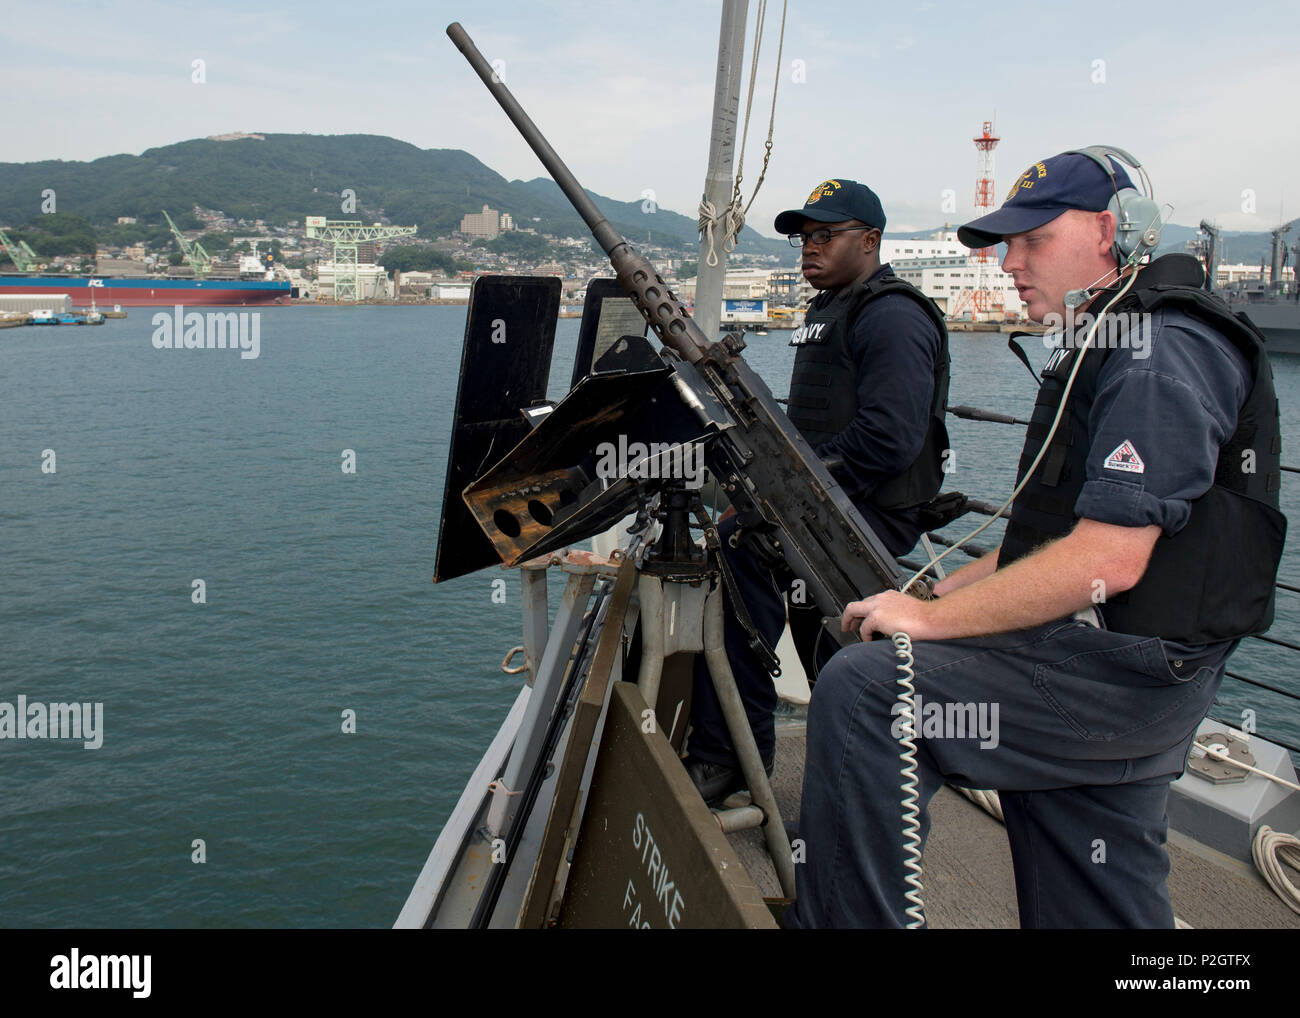 160922-N-SU278-199 SASEBO, Japan (Sept. 22, 2016) Gunner’s Mates 3rd Class Javon McCloud and Keith Oliver, assigned to the guided-missile destroyer USS Spruance (DDG 111), monitor surface vessel activity while pulling into port, Sasebo, Japan, Sept. 22, 2016. Spruance and the guided-missile destroyers USS Momsen (DDG 92) and USS Decatur (DDG 73), along with embarked “Warbirds” and “Devilfish” detachments of Helicopter Maritime Strike Squadron (HSM) 49, are deployed in support of maritime security and stability in the Indo-Asia-Pacific as part of a U.S. 3rd Fleet Pacific Surface Action Group (P Stock Photo